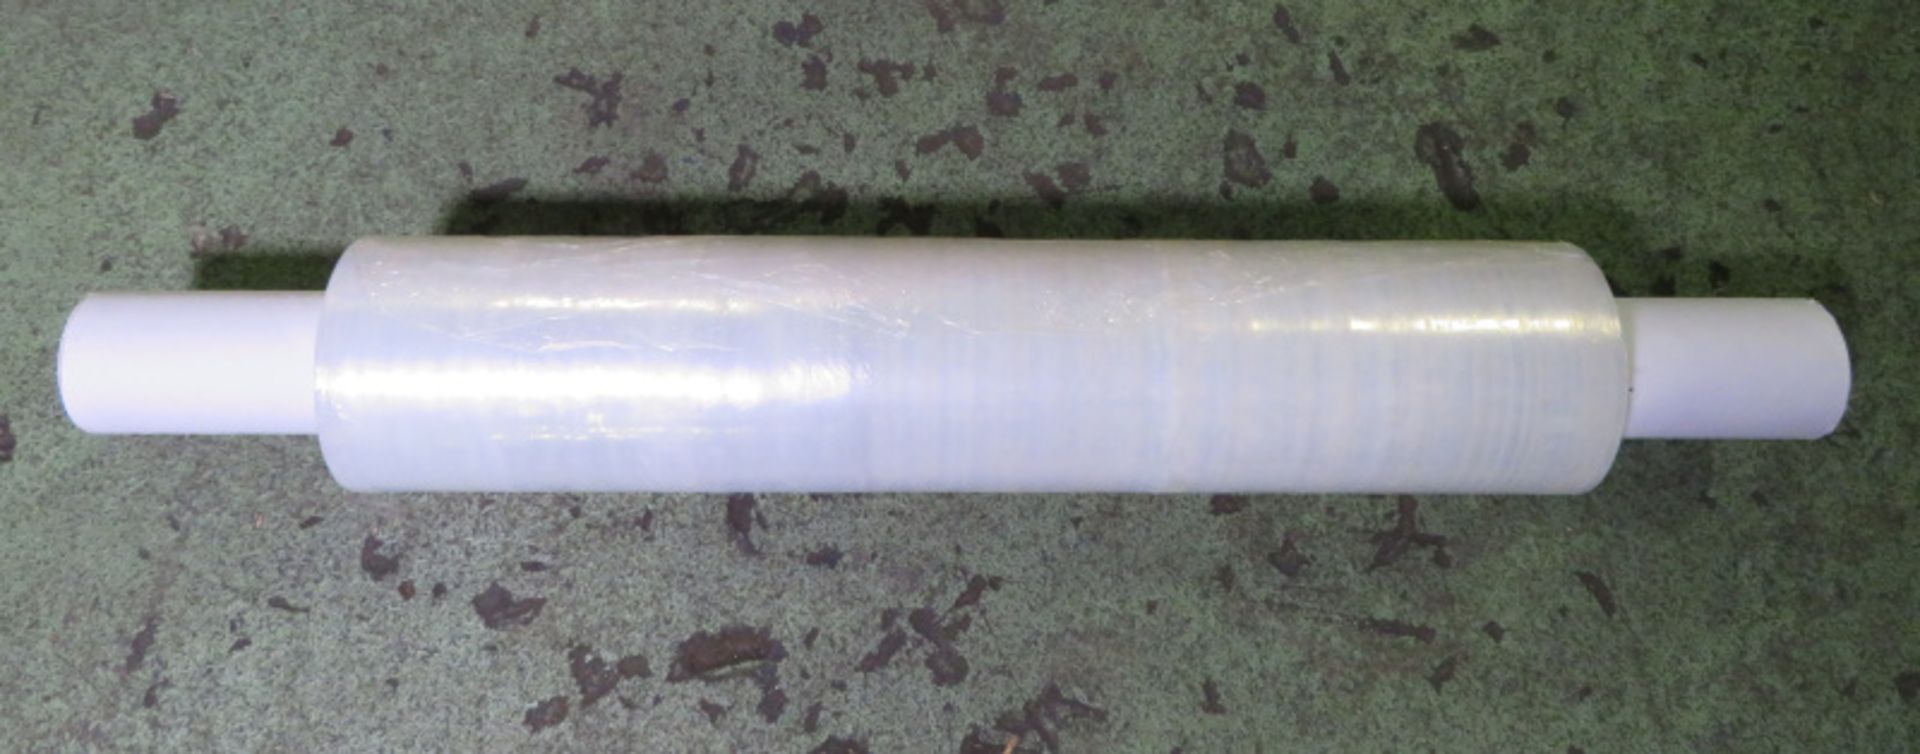 6x Rolls of clear polythene wrap - Image 2 of 2